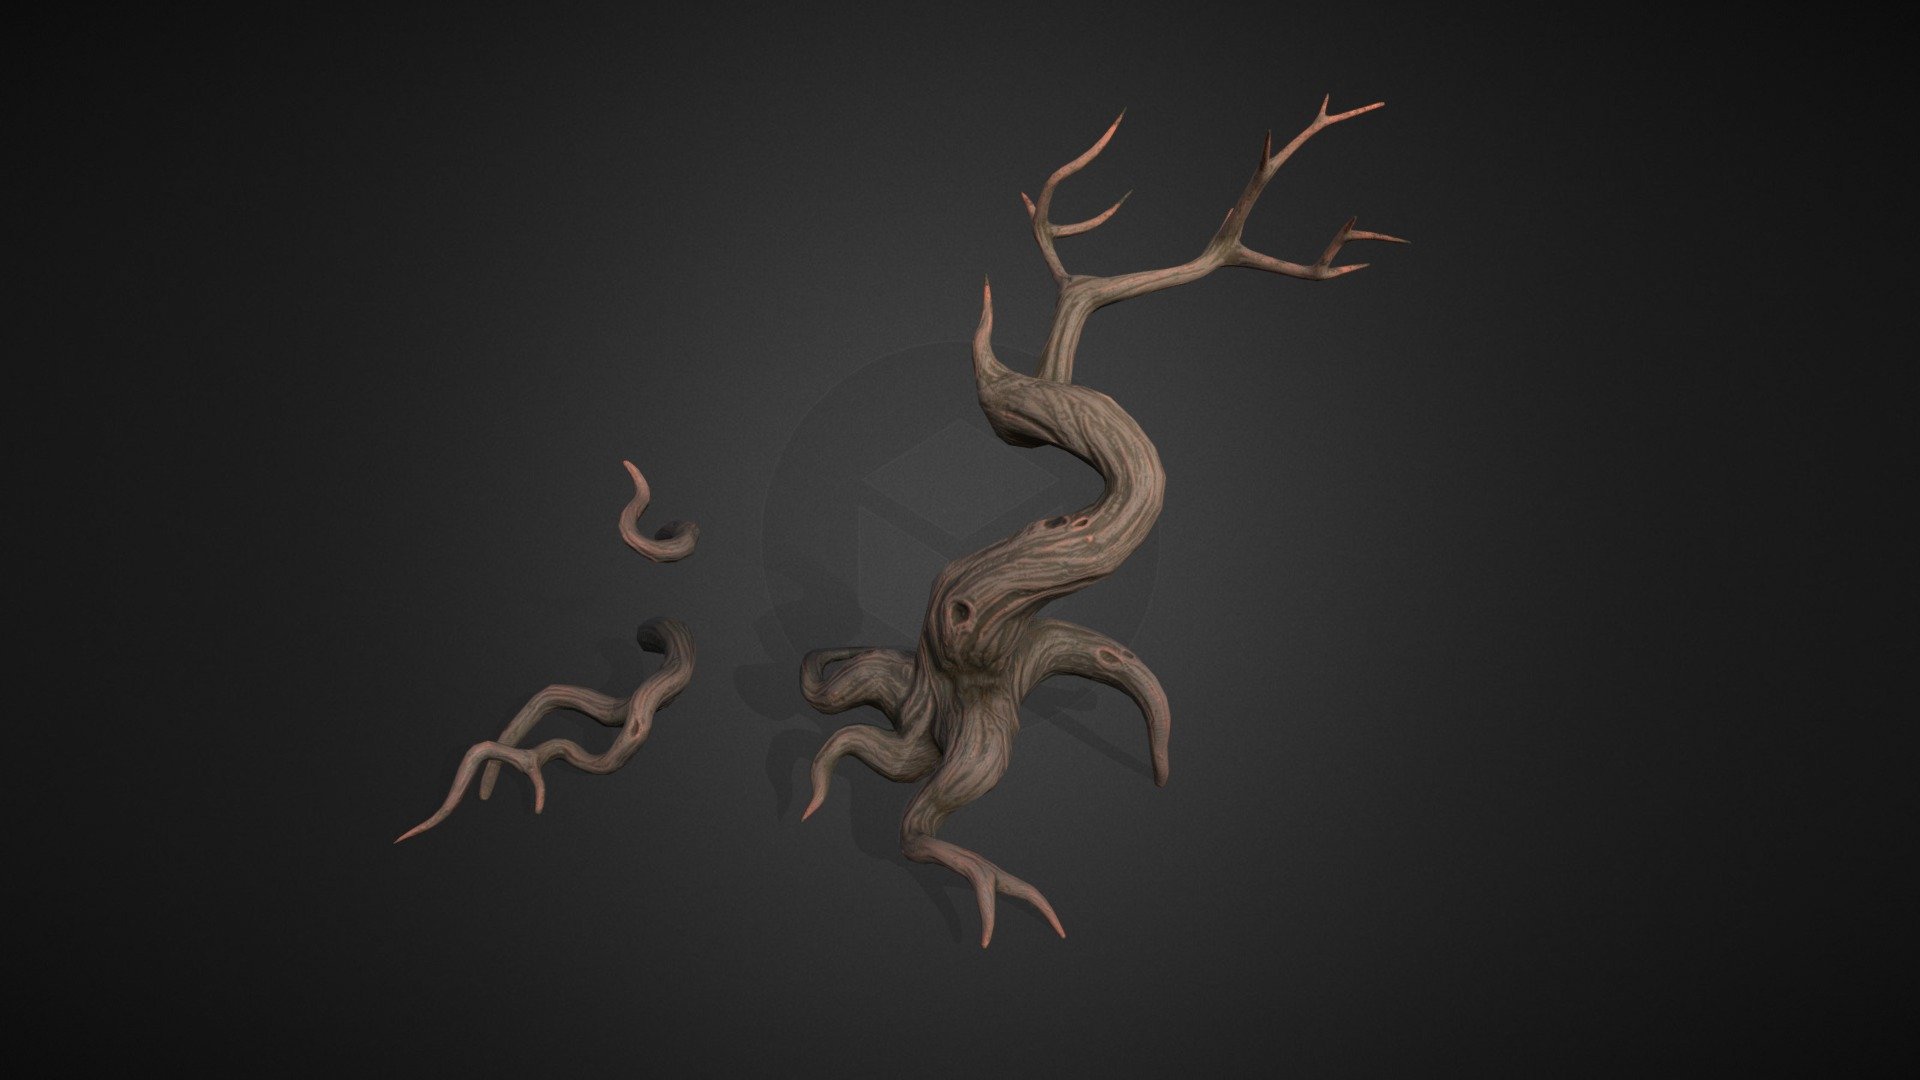 This model is part of a bigger fantasy diorama our company worked on.
The loose root parts can be used to decorate the environment surrounding the tree 3d model